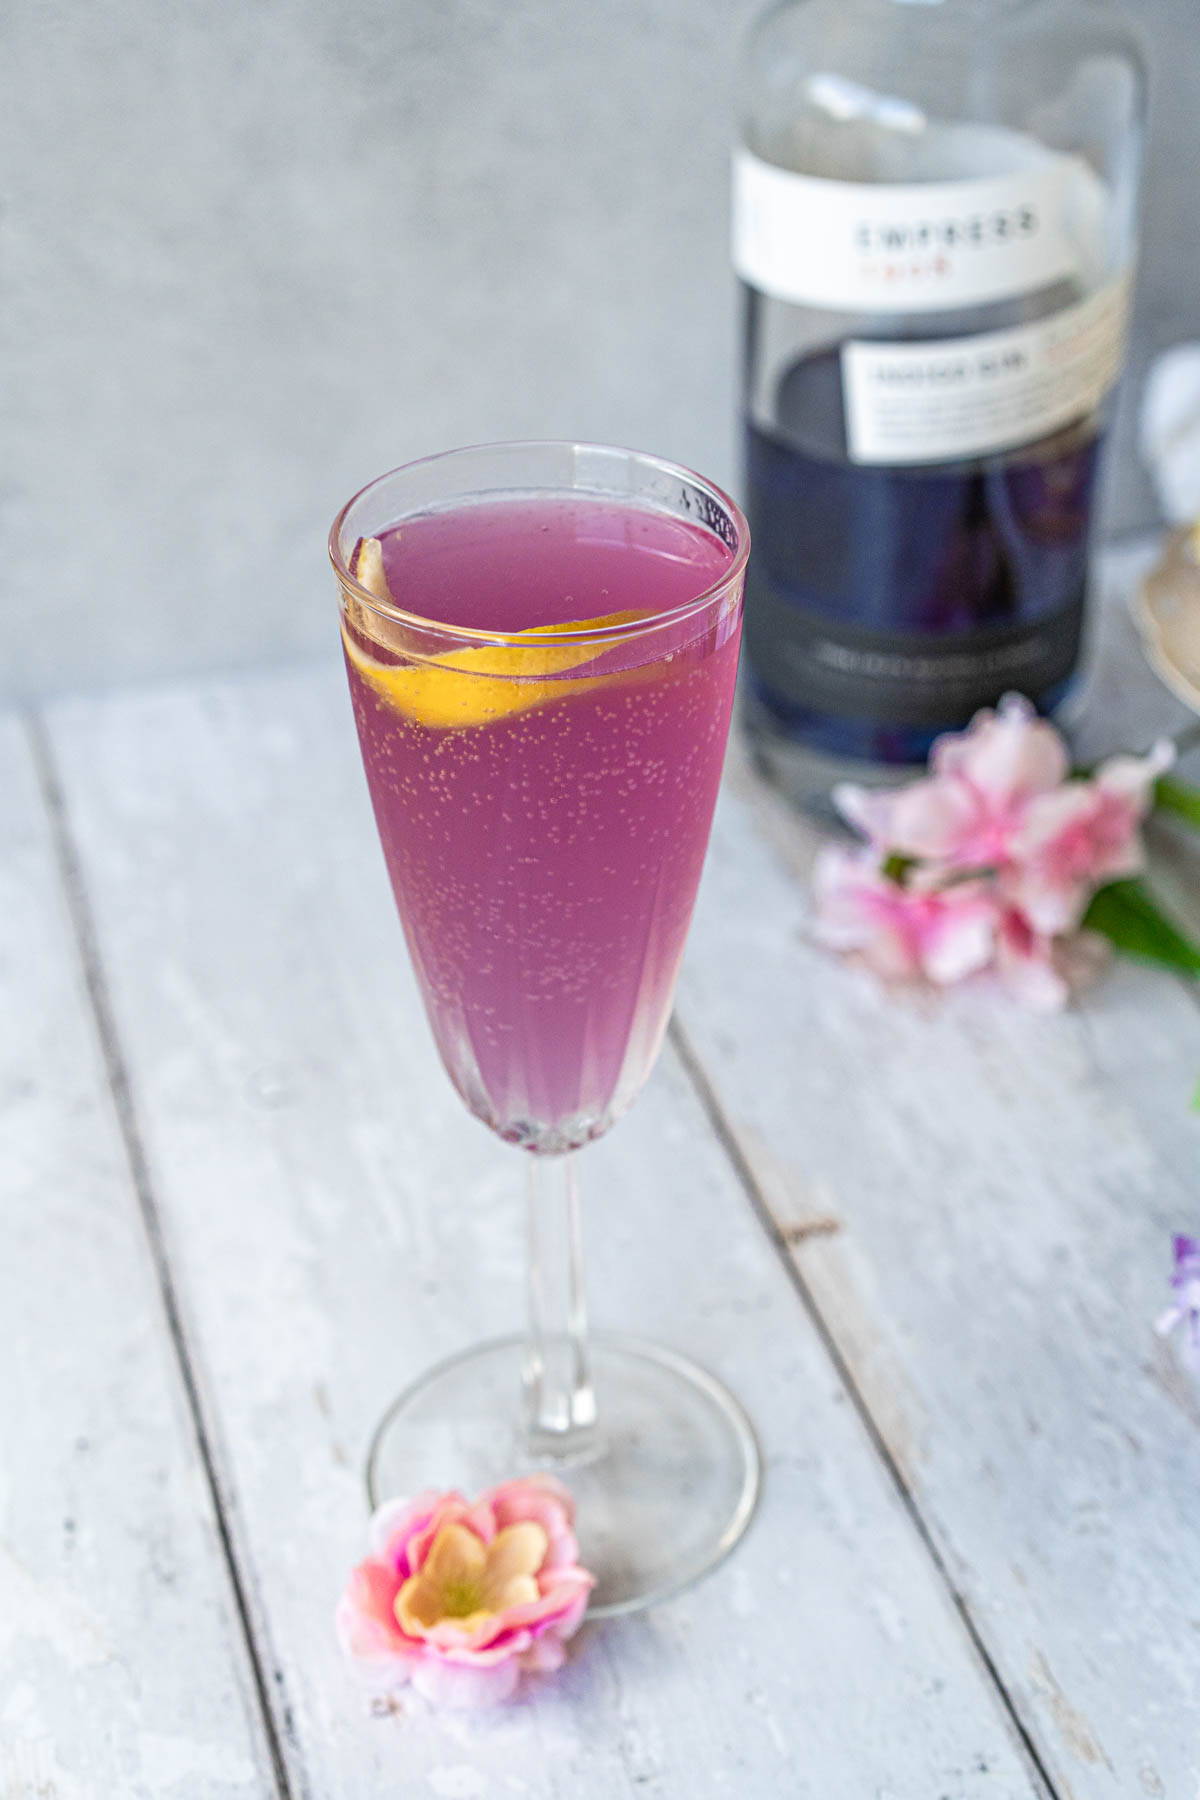 crystal champagne flute filled with a pale purple bubbling cocktail and garnished with a lemon twist; bottle of empress gin is blurred in the background